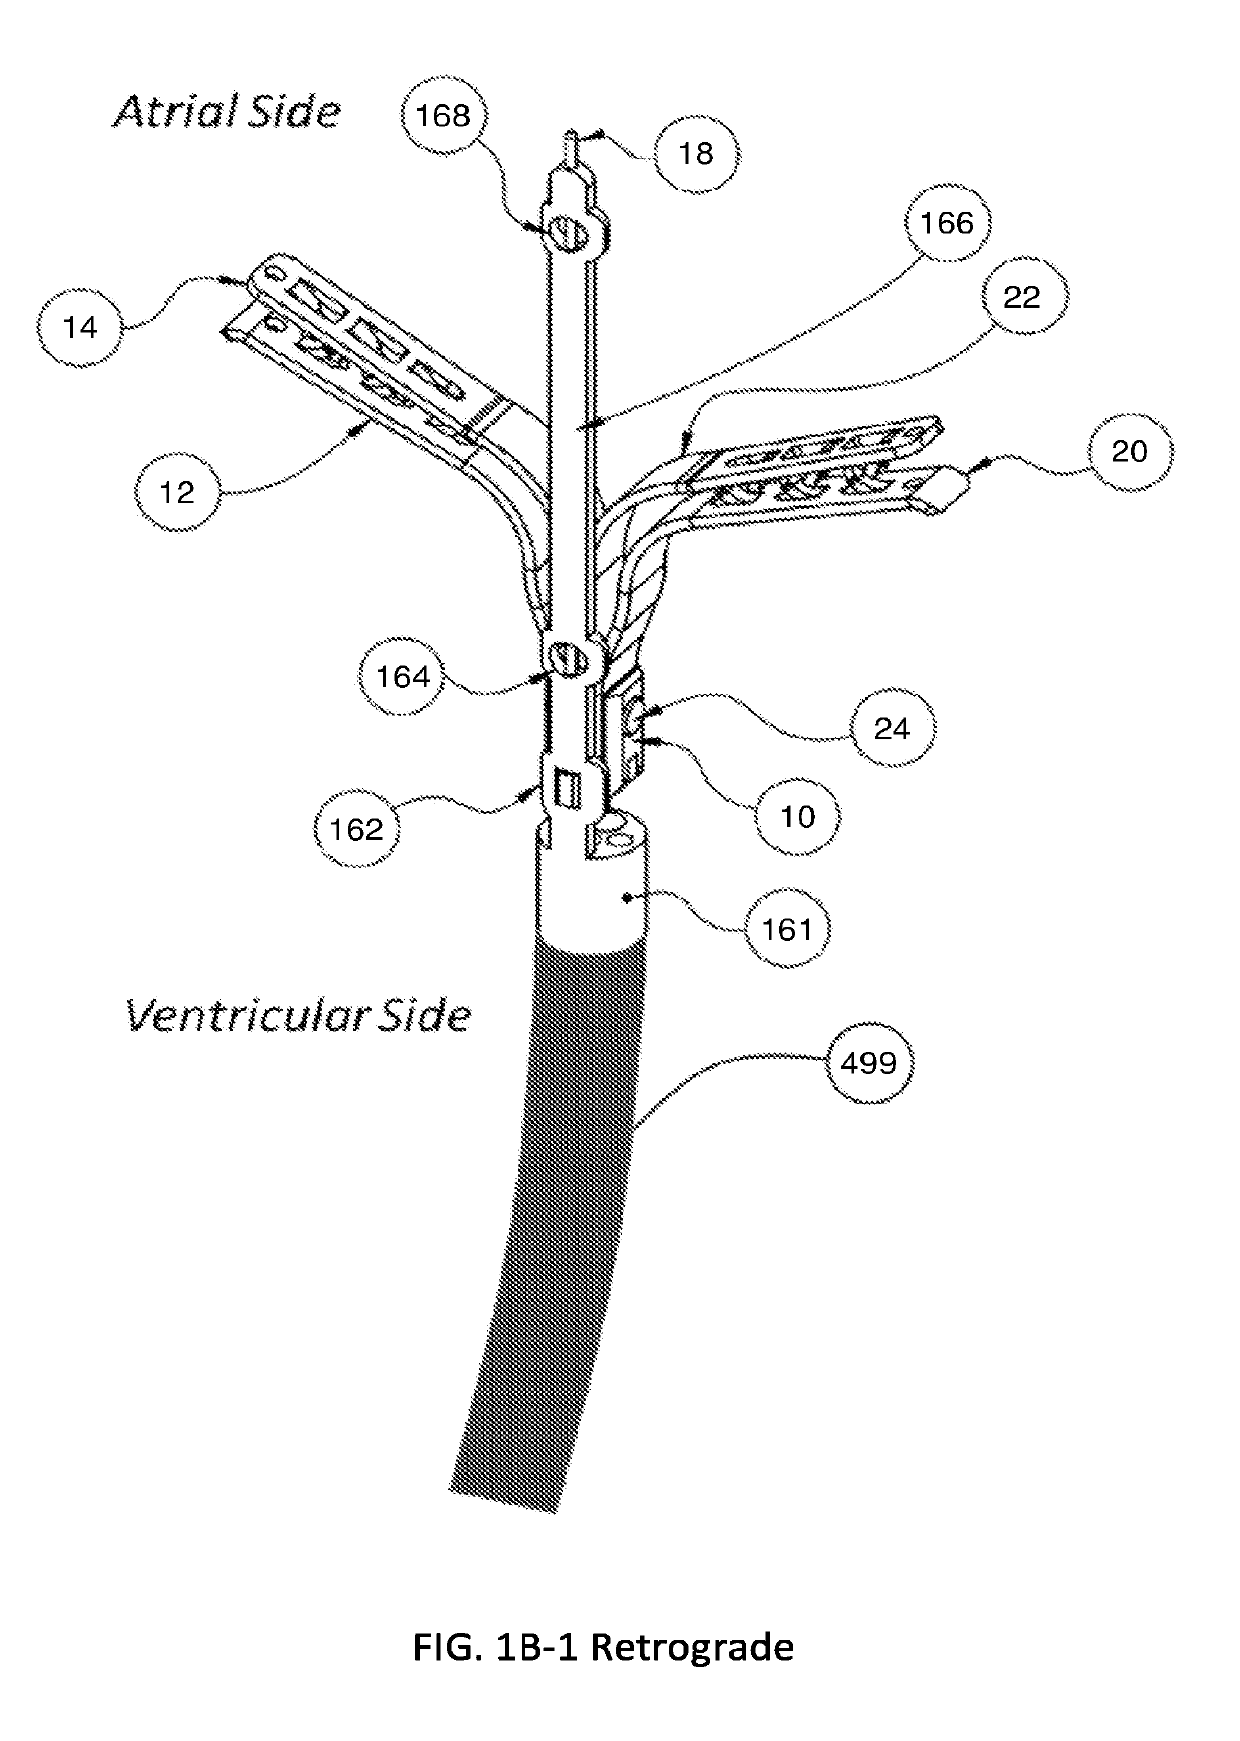 Tissue grasping devices and related methods